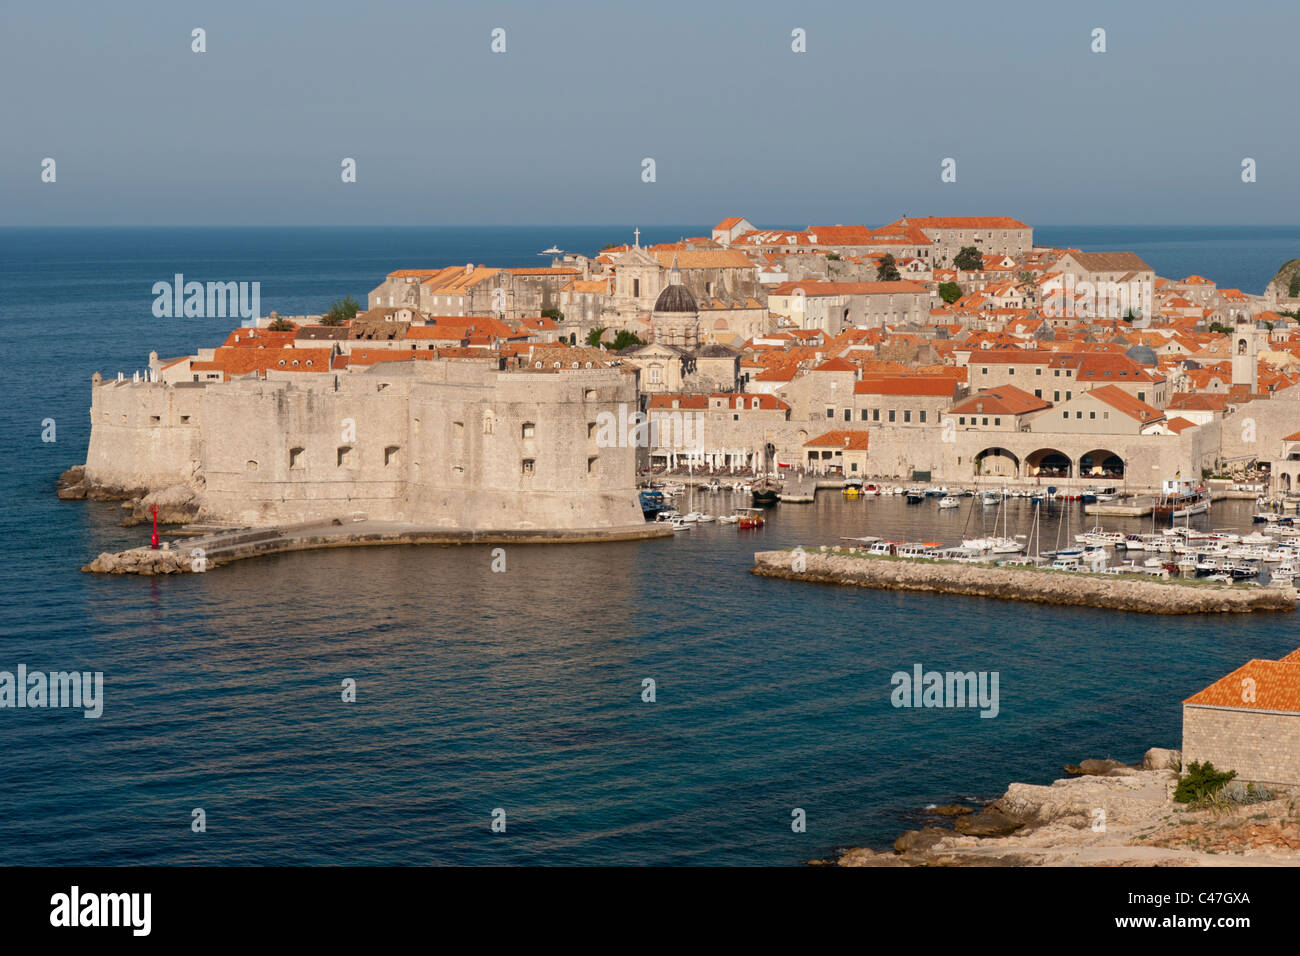 The city of Dubrovnik on the Adriatic Coast in Croatia is a UNESCO World Heritage Site and popular tourist destination. Stock Photo